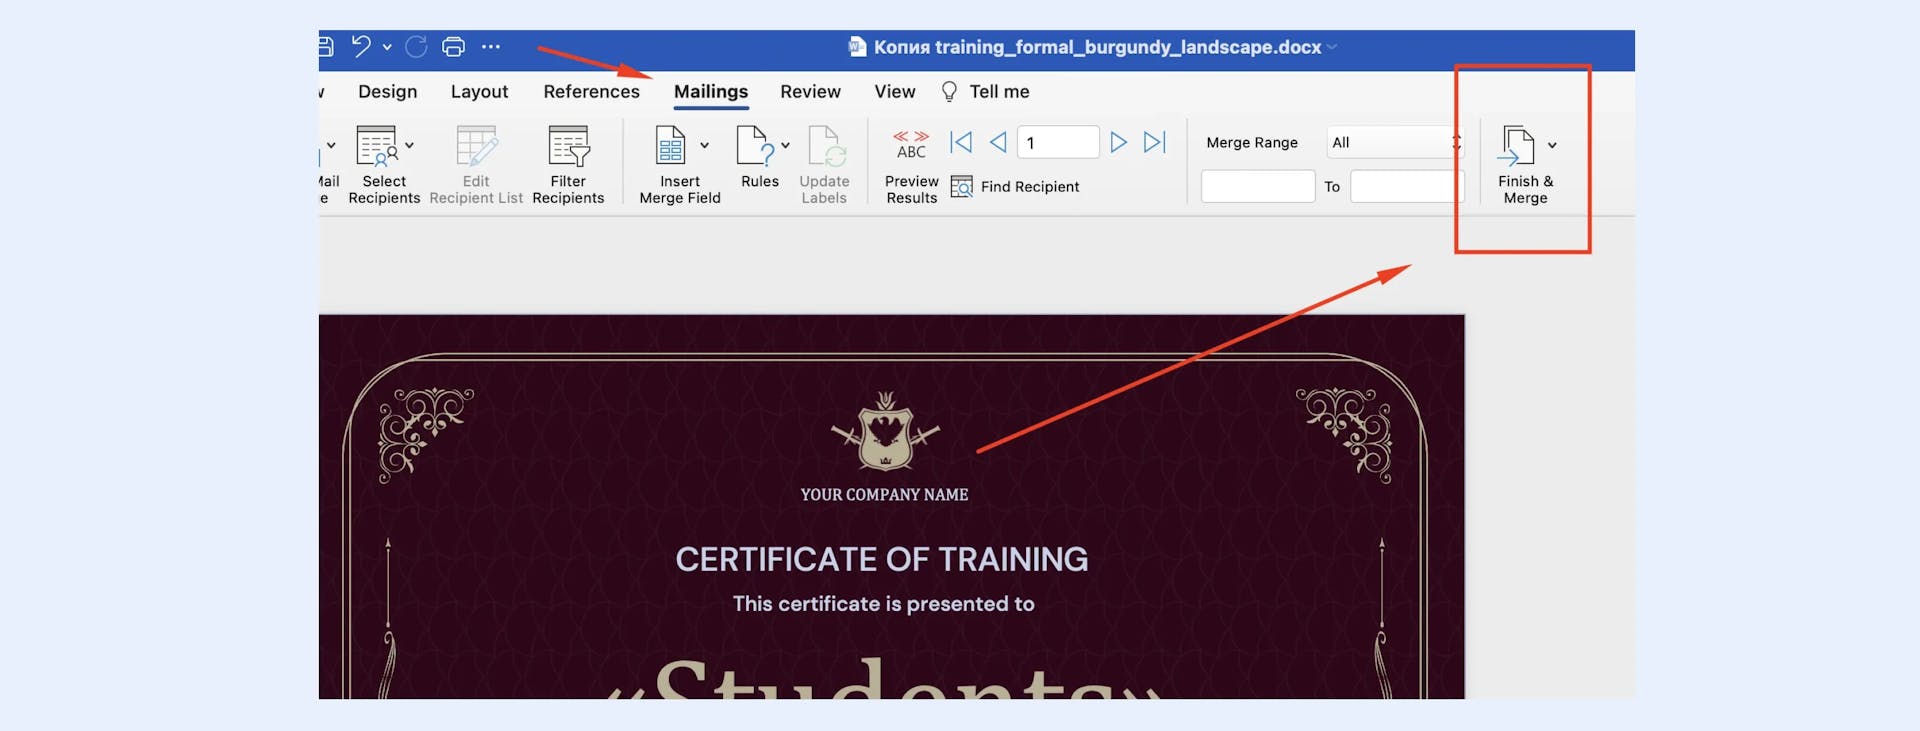 Fining and merge certificates